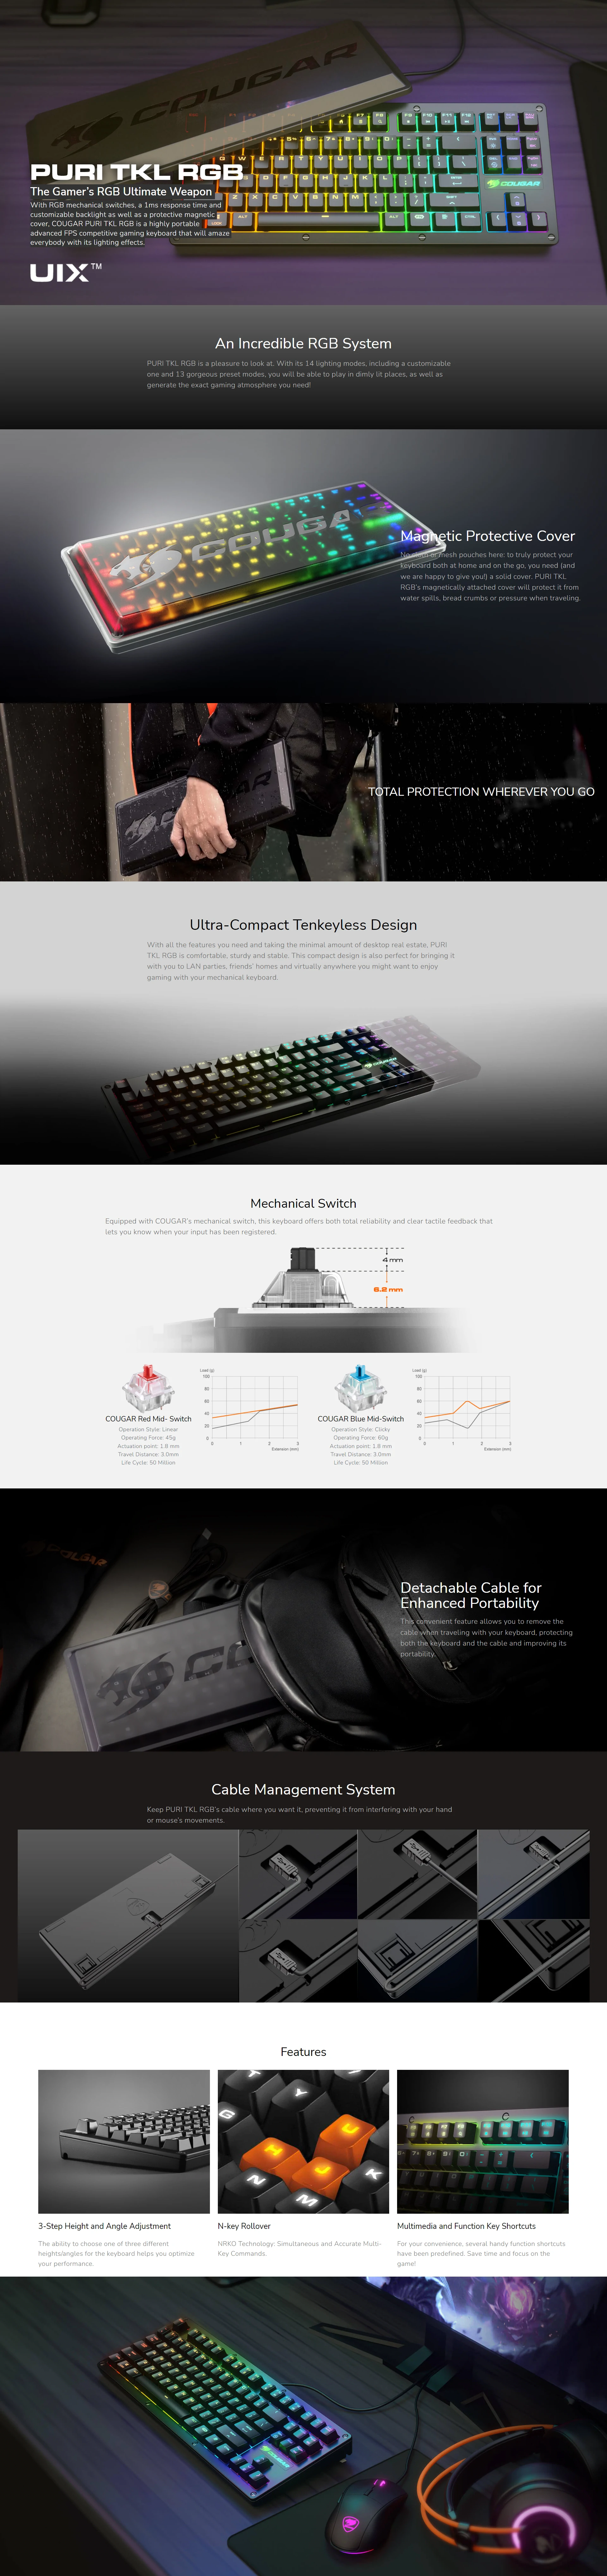 Overview - Cougar - Attack X3 TKL RGB -Mechanical Gaming Keyboard